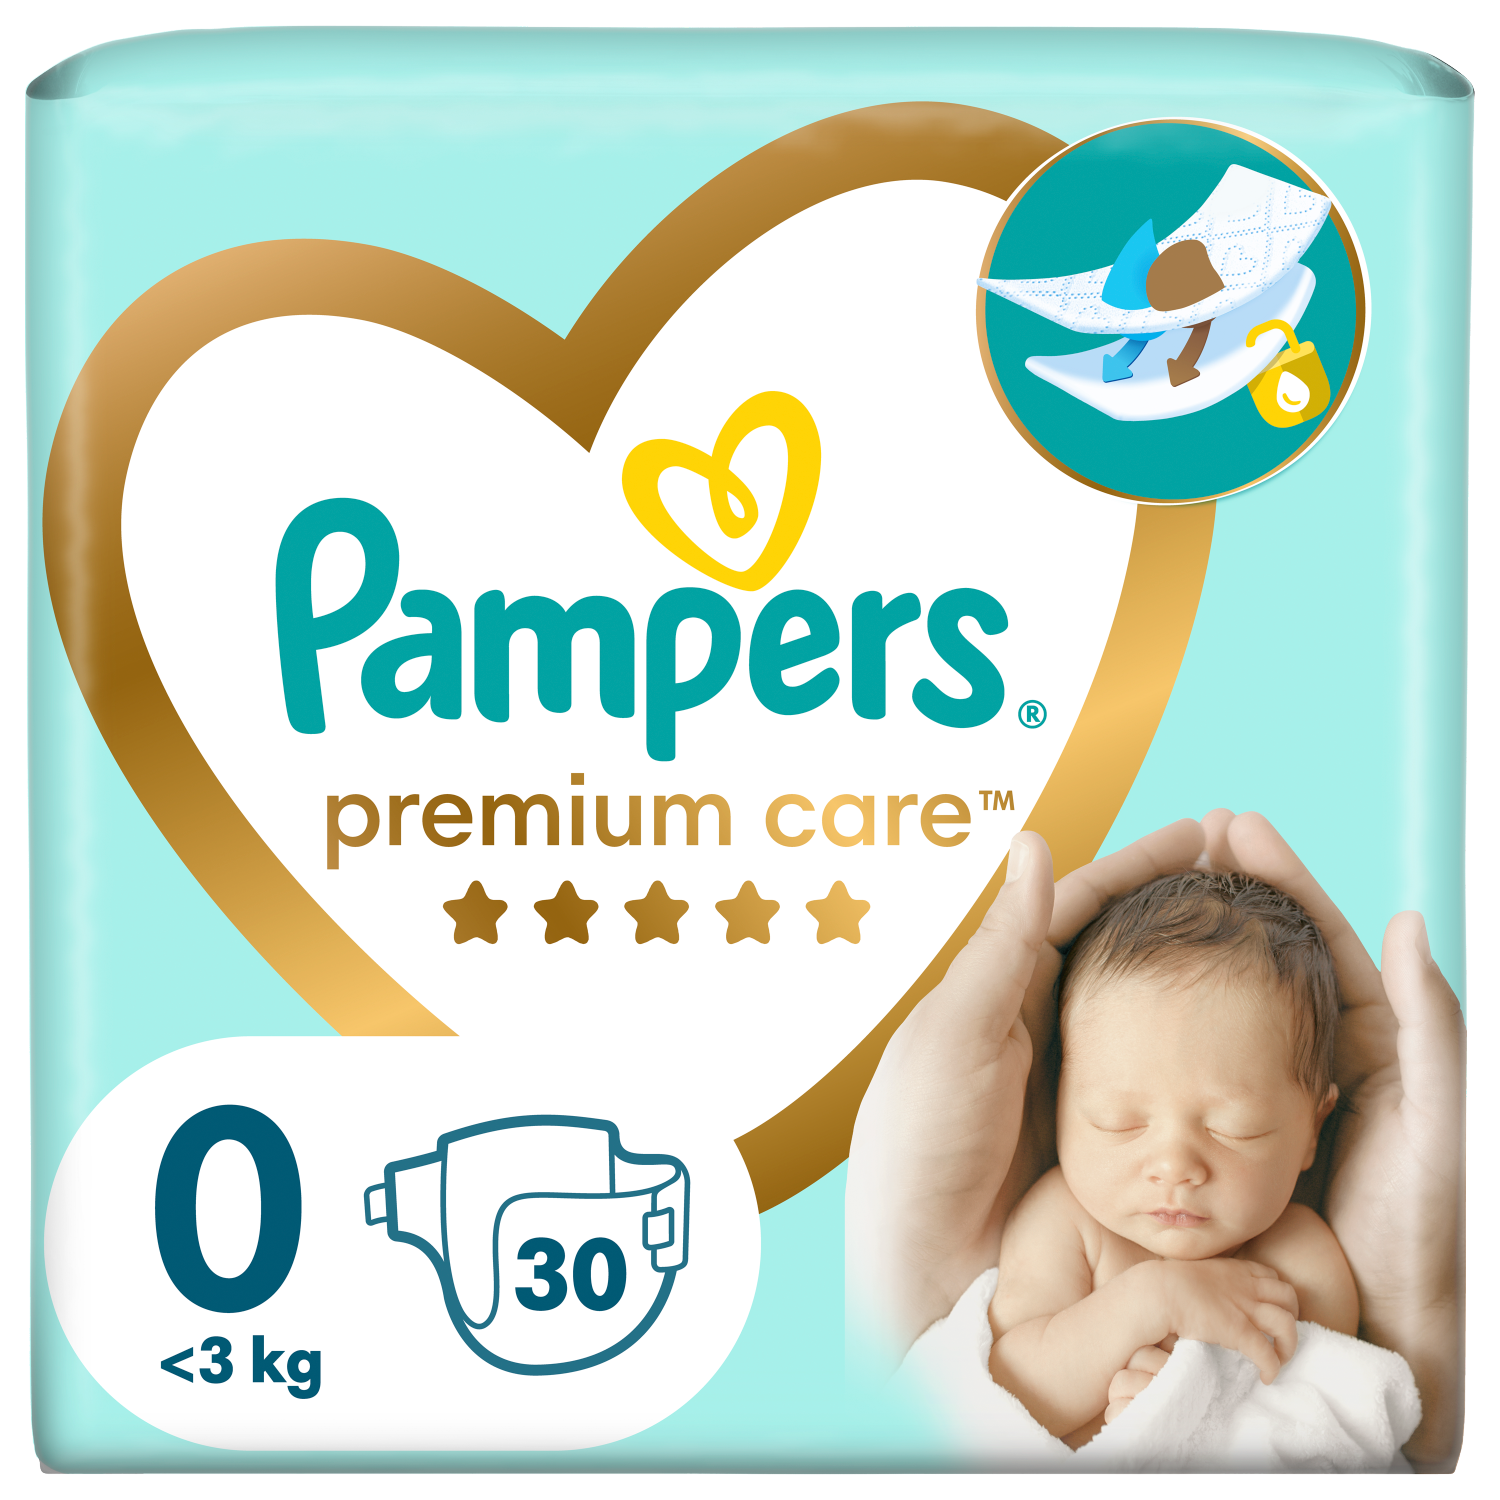 pieluchy pampers lidl